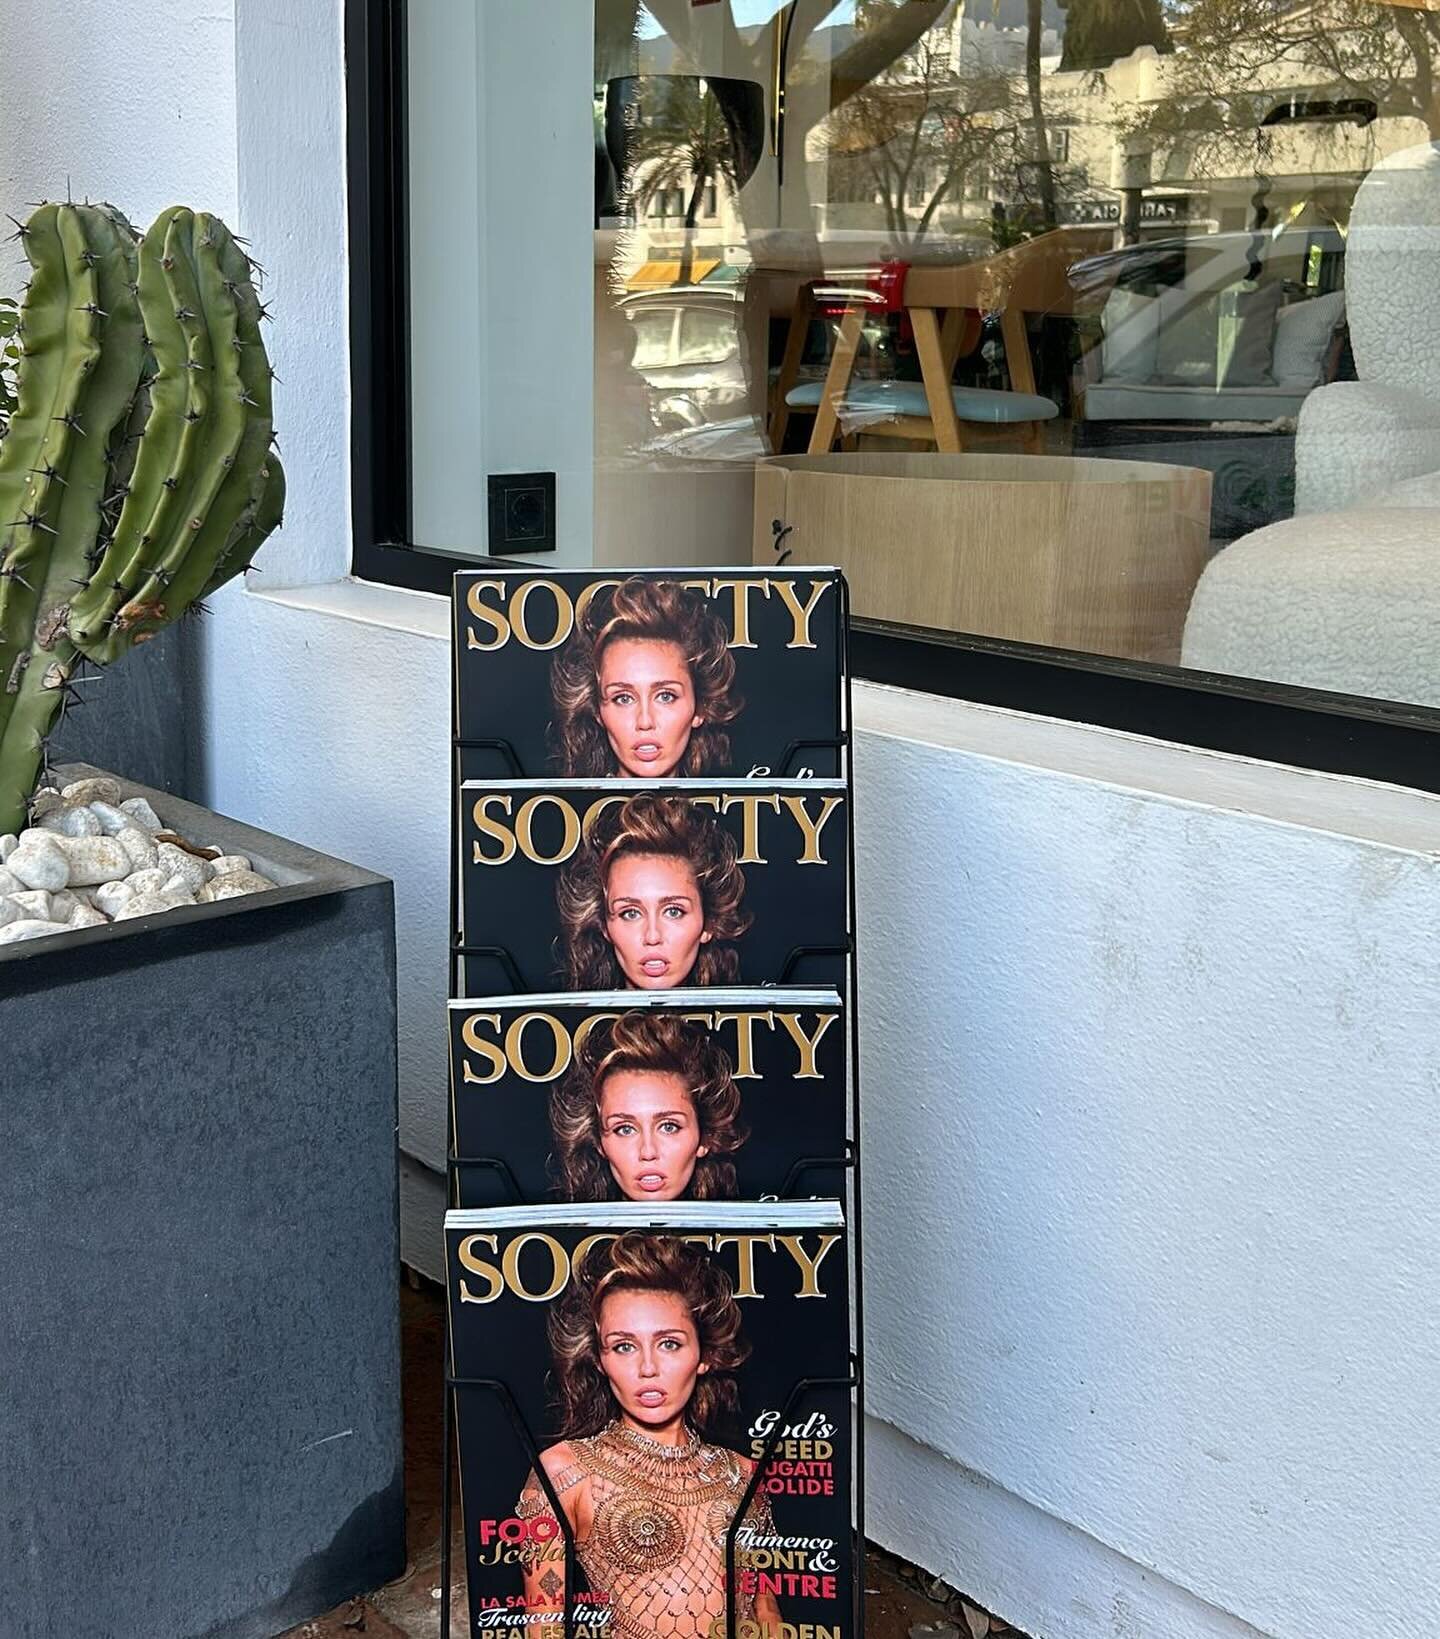 Pick up your copy of Golden Miley on the Golden Mile or at any of our multiple bespoke magazine racks! ⭐️ #HelloApril #MileyCyrus #MarbellaMagazine #MarbellaLifestyle